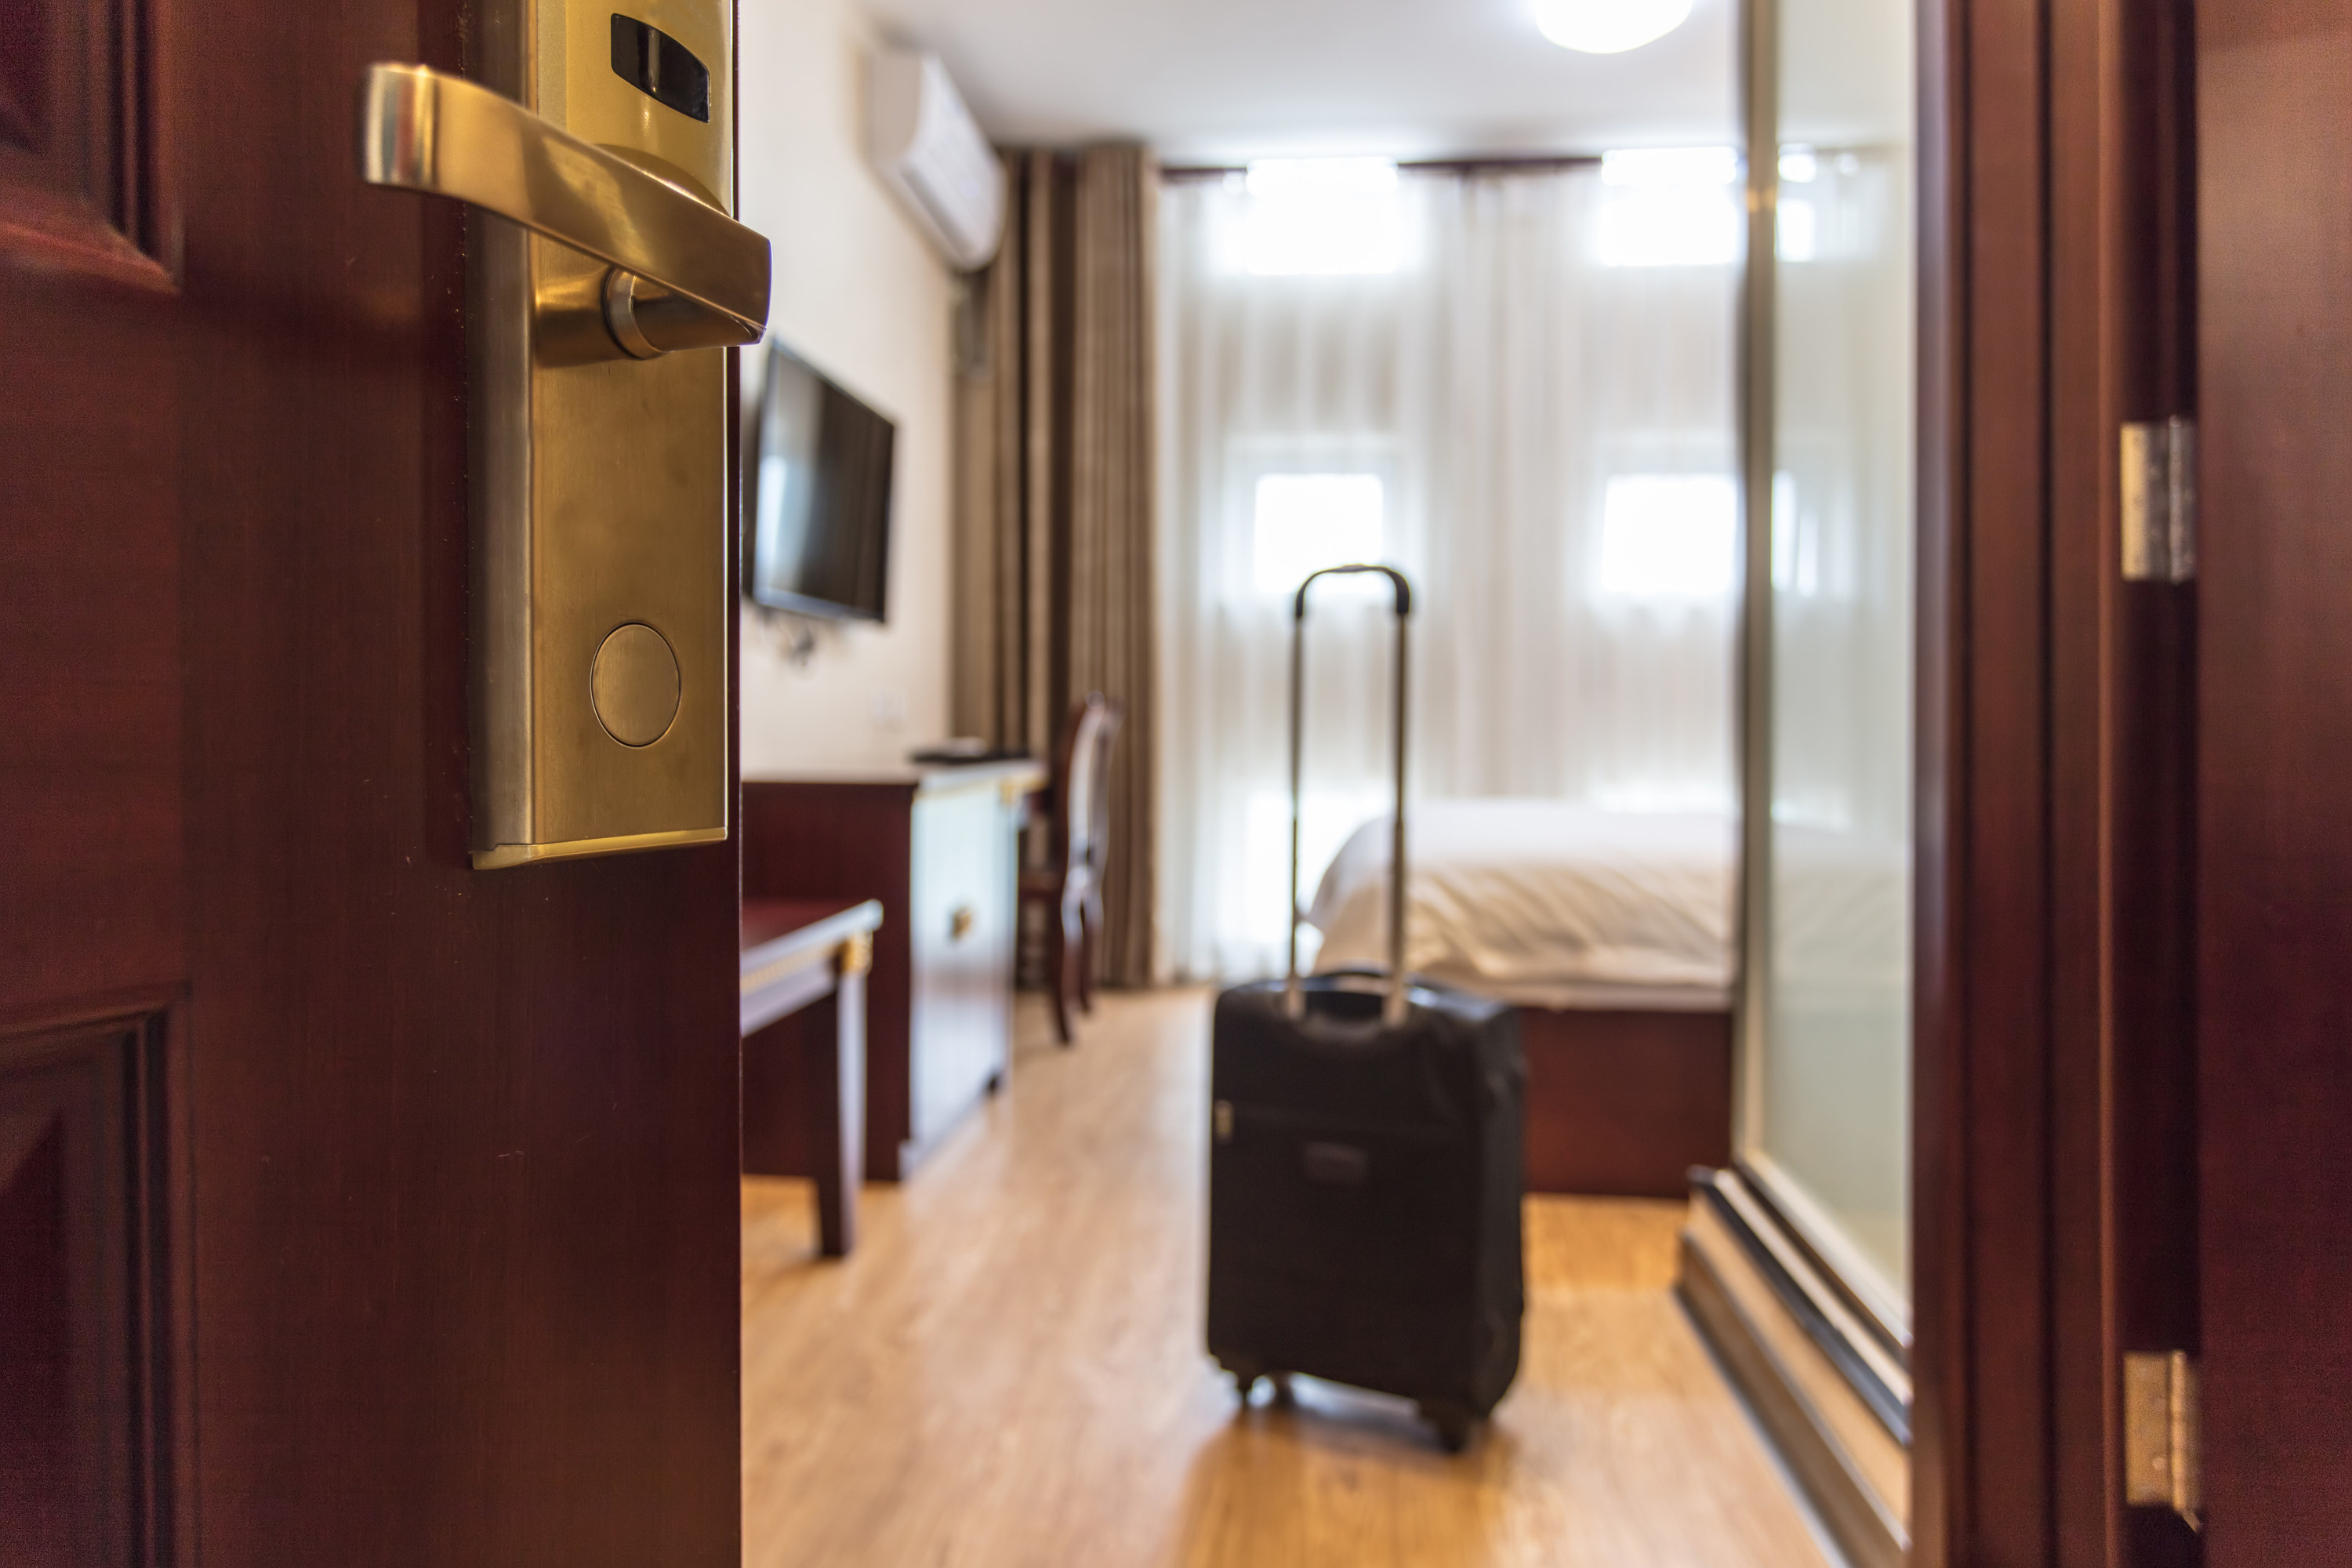 A black suitcase in a hotel room with an open door